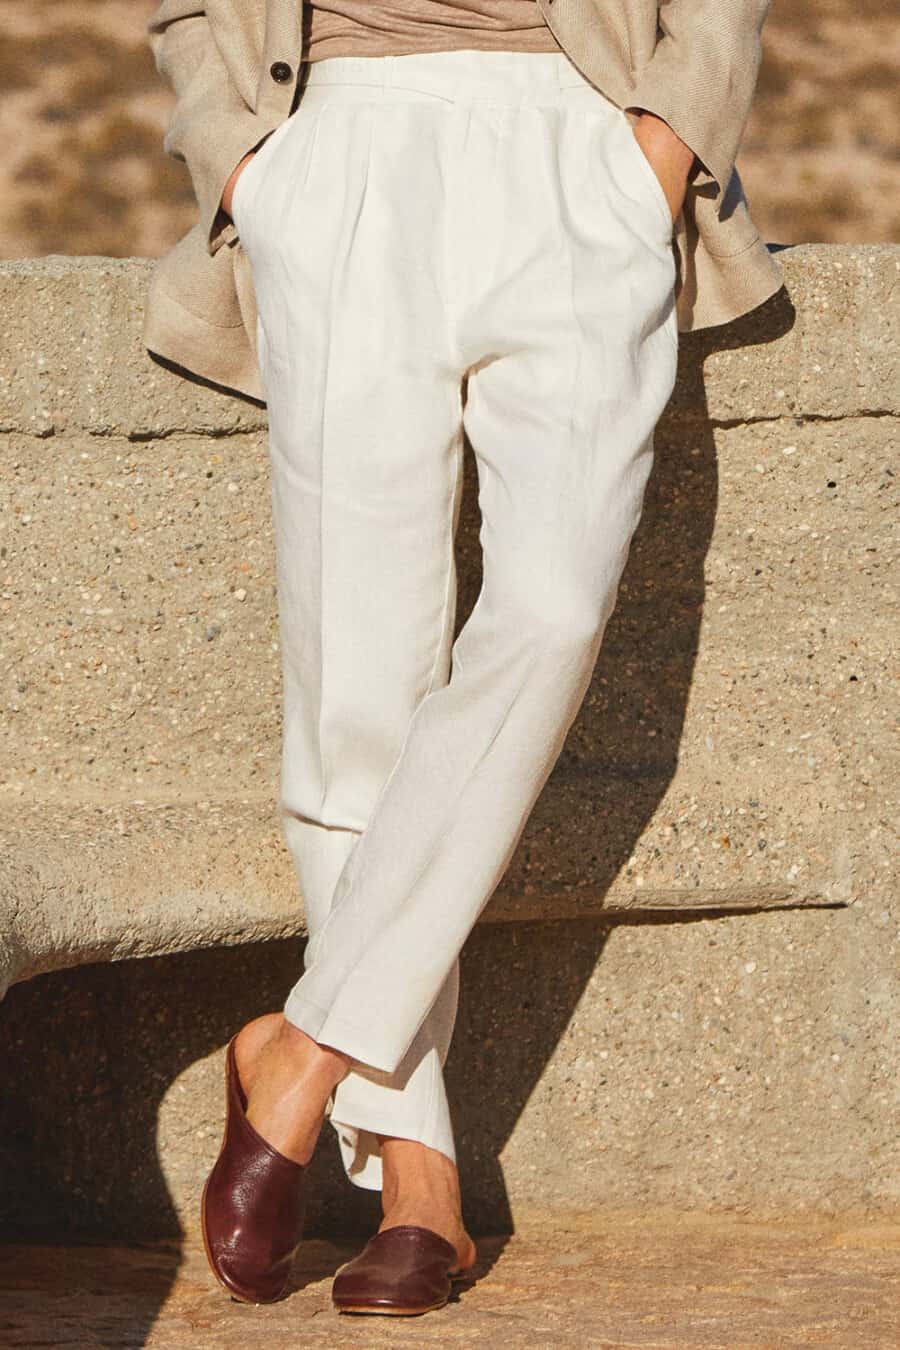 Man wearing white tailored, pleated pants with brown leather loafers